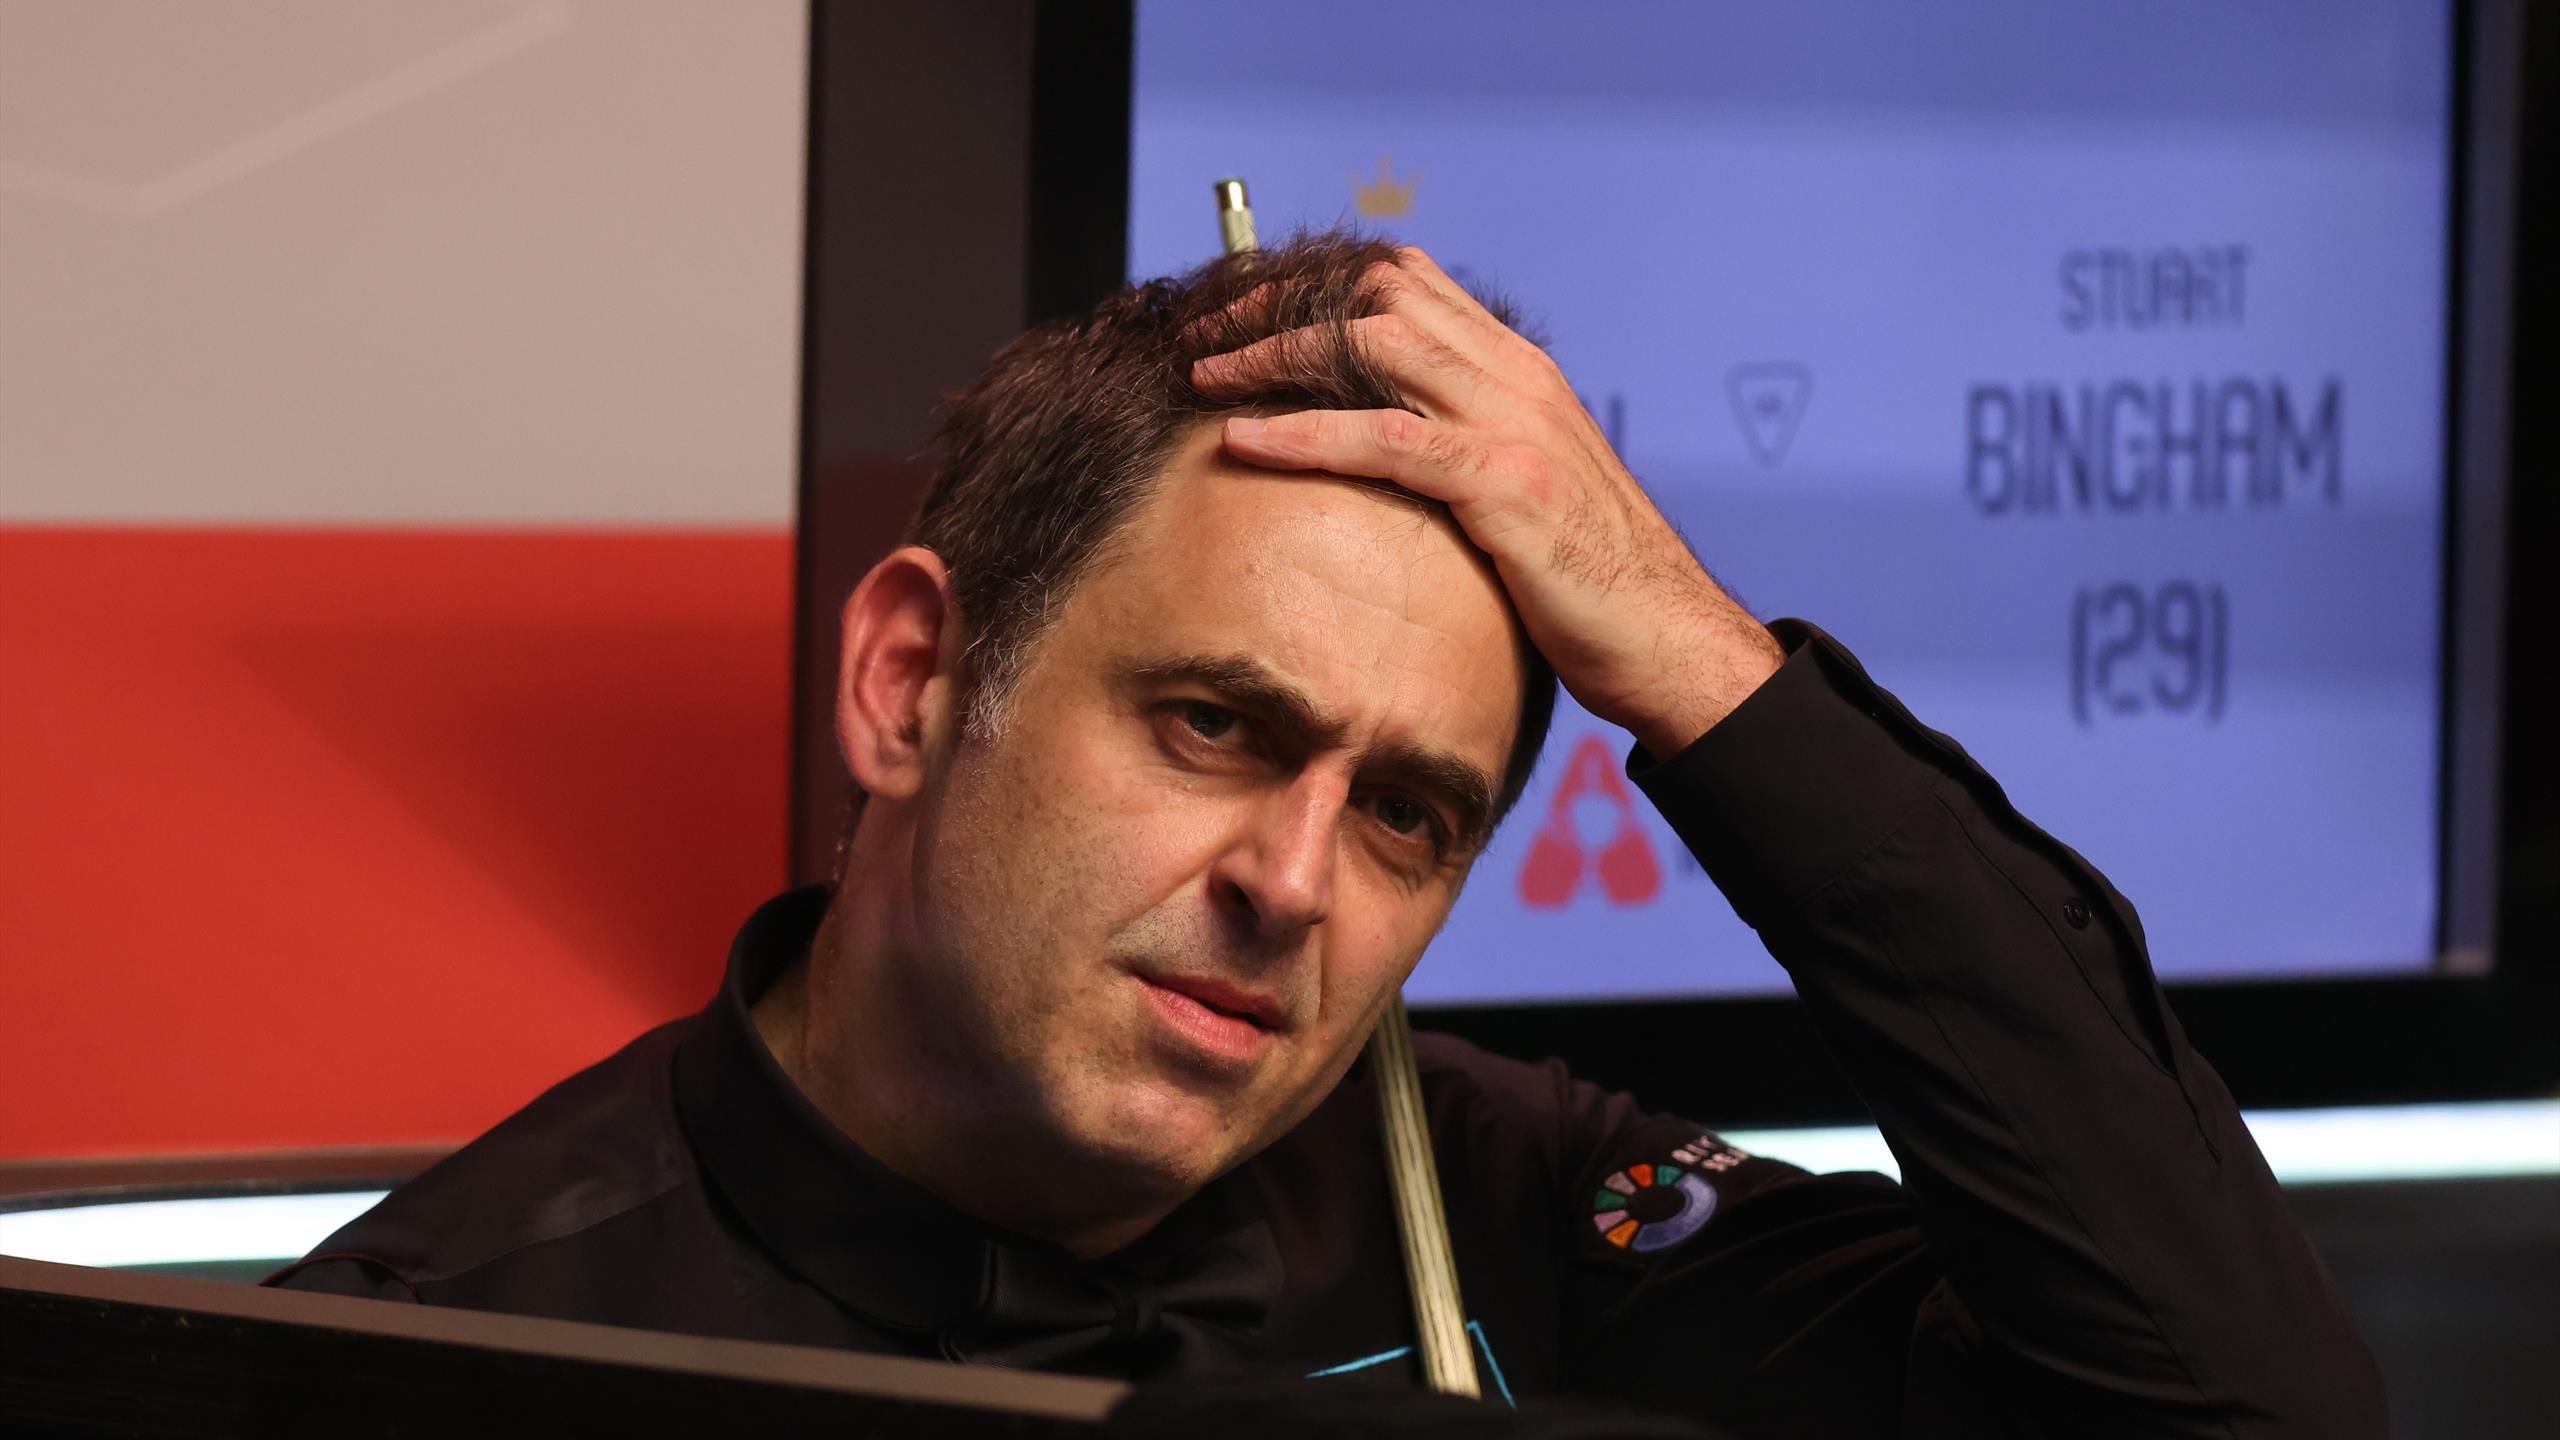 Ronnie O’Sullivan proposes modern refresh for Crucible Theatre in World Snooker Championship